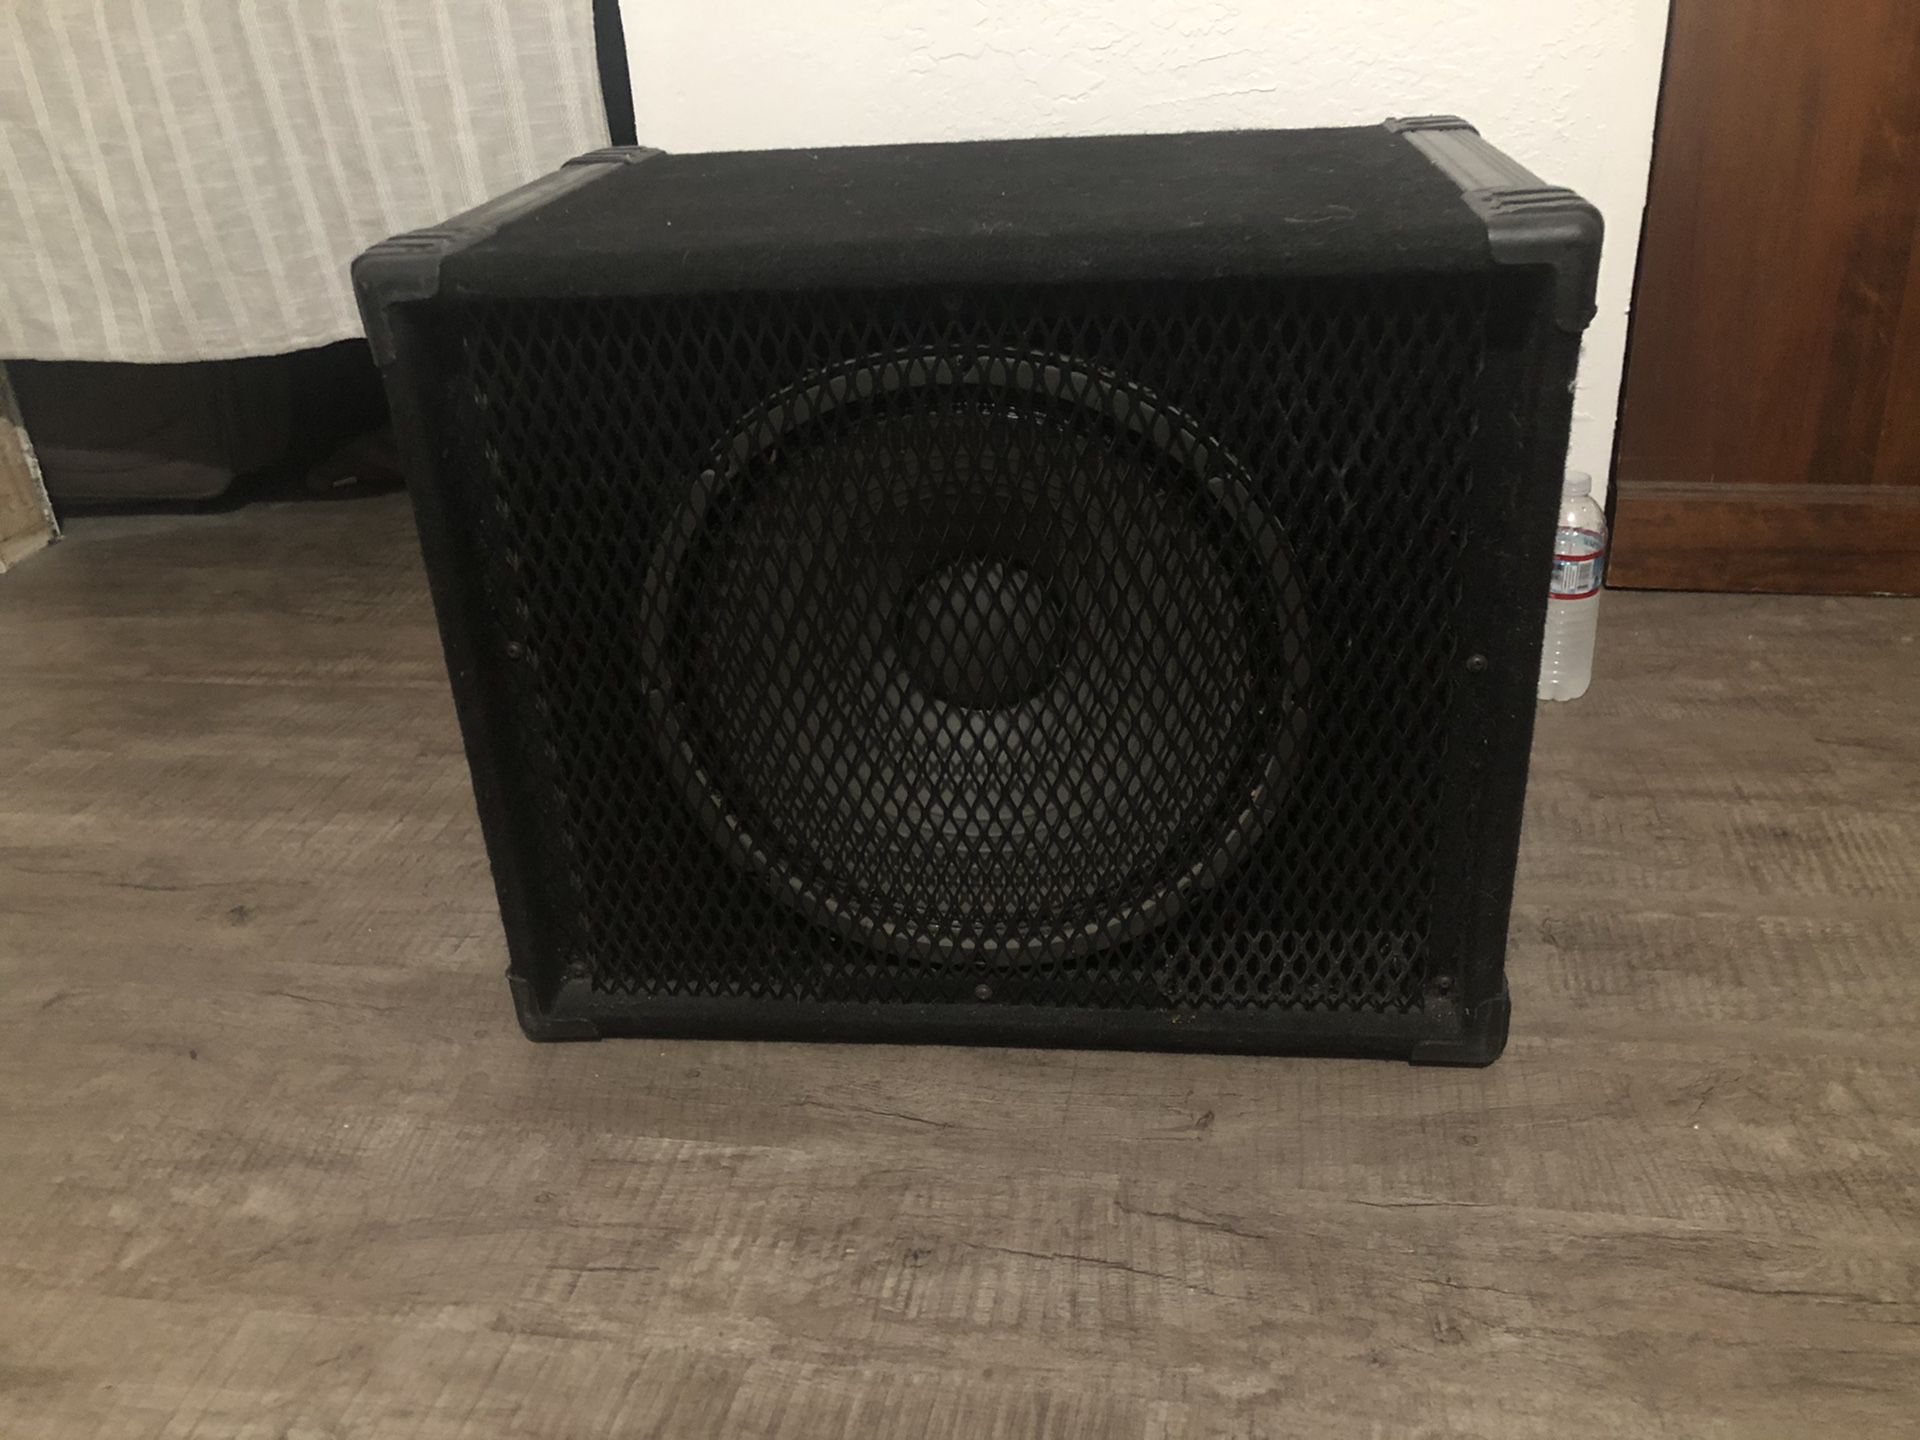 Crate bass cabinet 1 x 15”